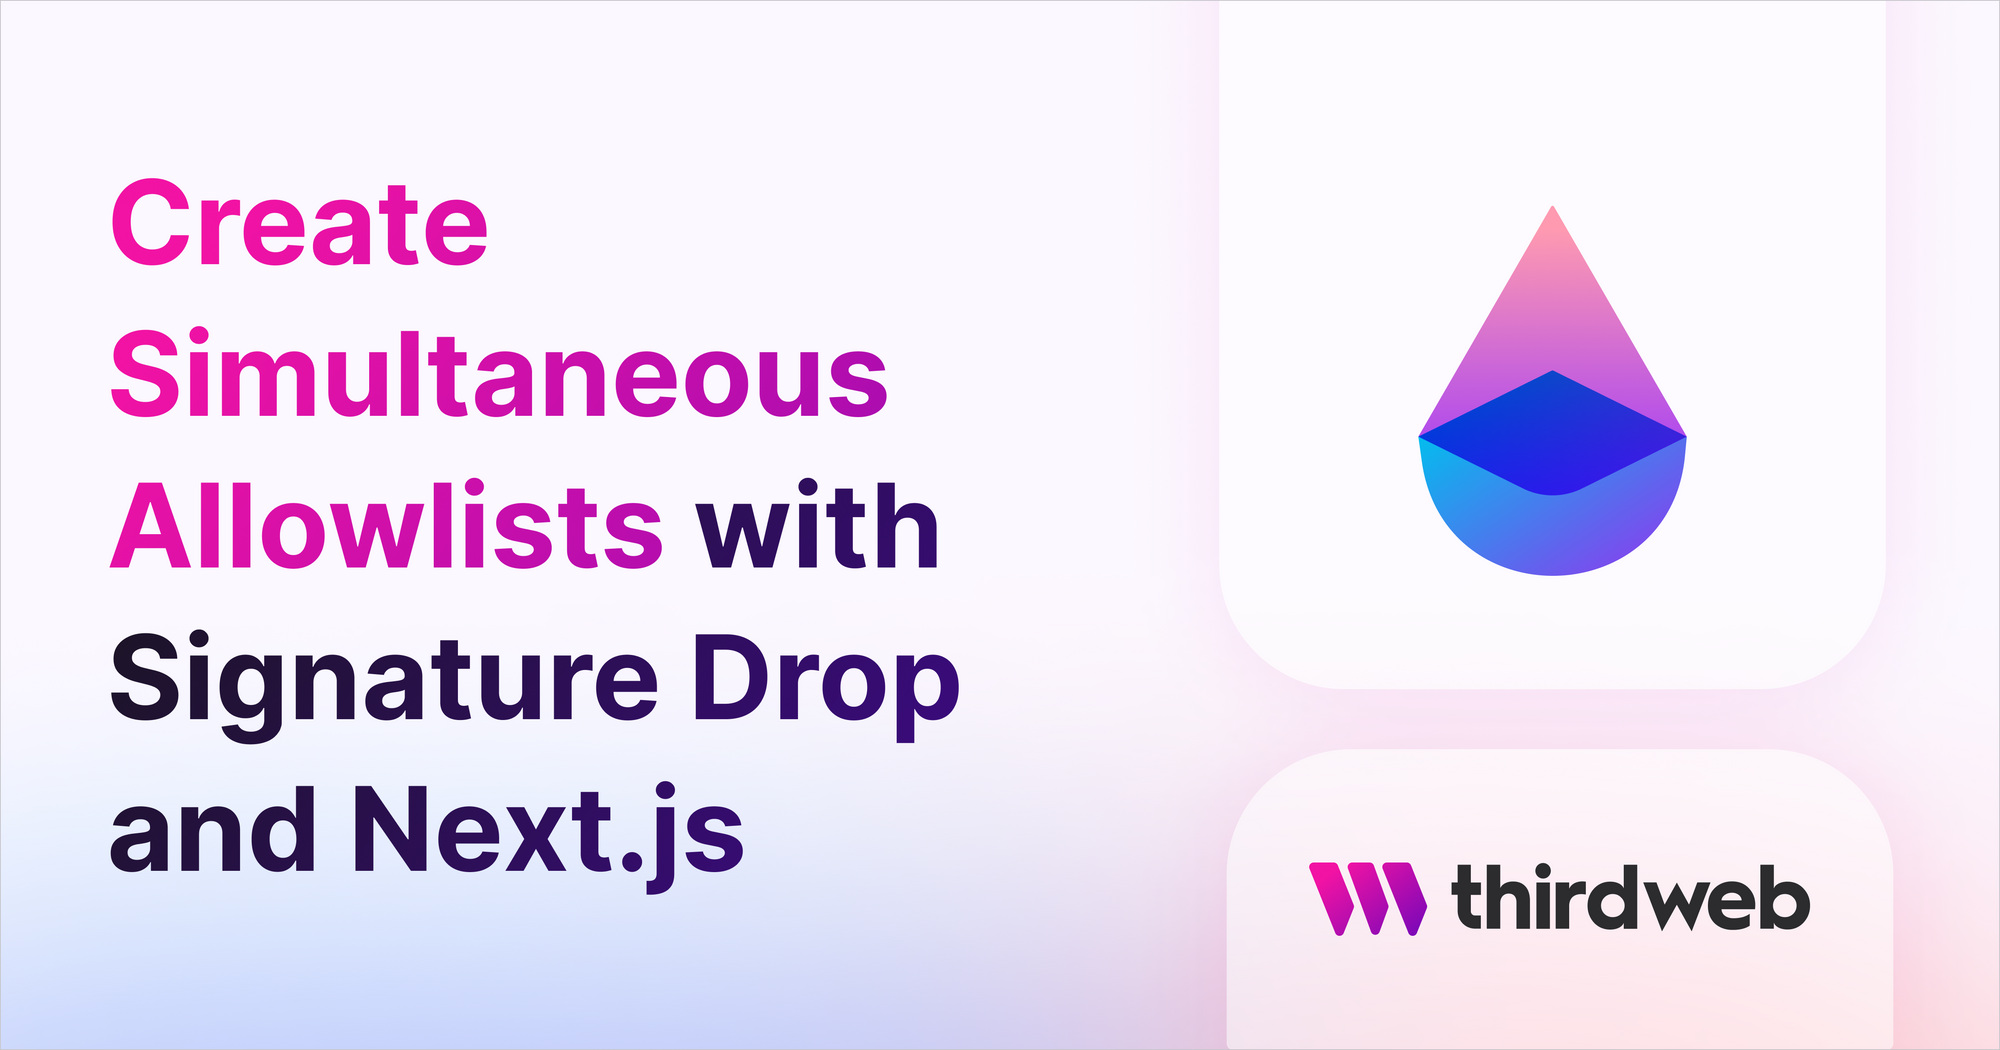 Create Simultaneous Allowlists drop with Signature Drop and Next.js